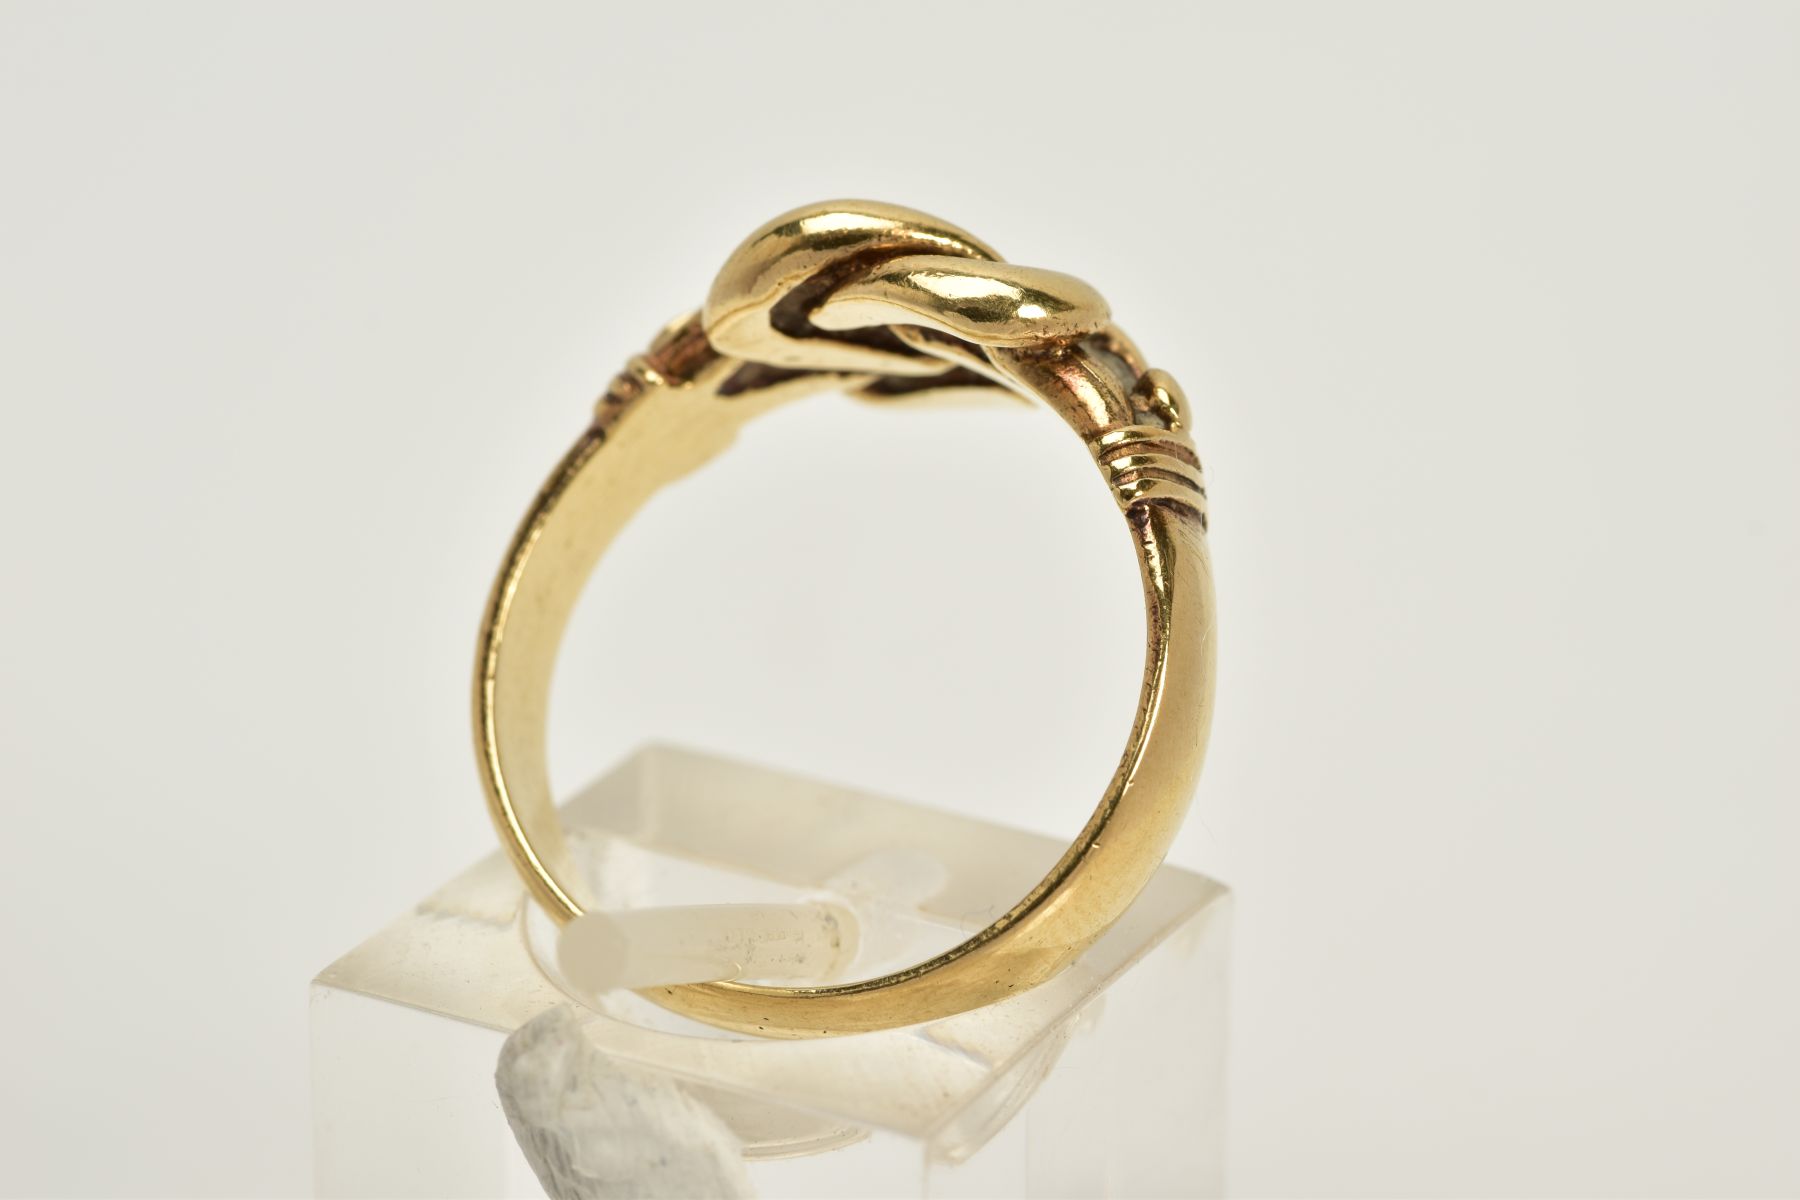 A 9CT GOLD KNOT RING, with a plain polished wide band, hallmarked 9ct gold London, ring size O, - Image 3 of 3